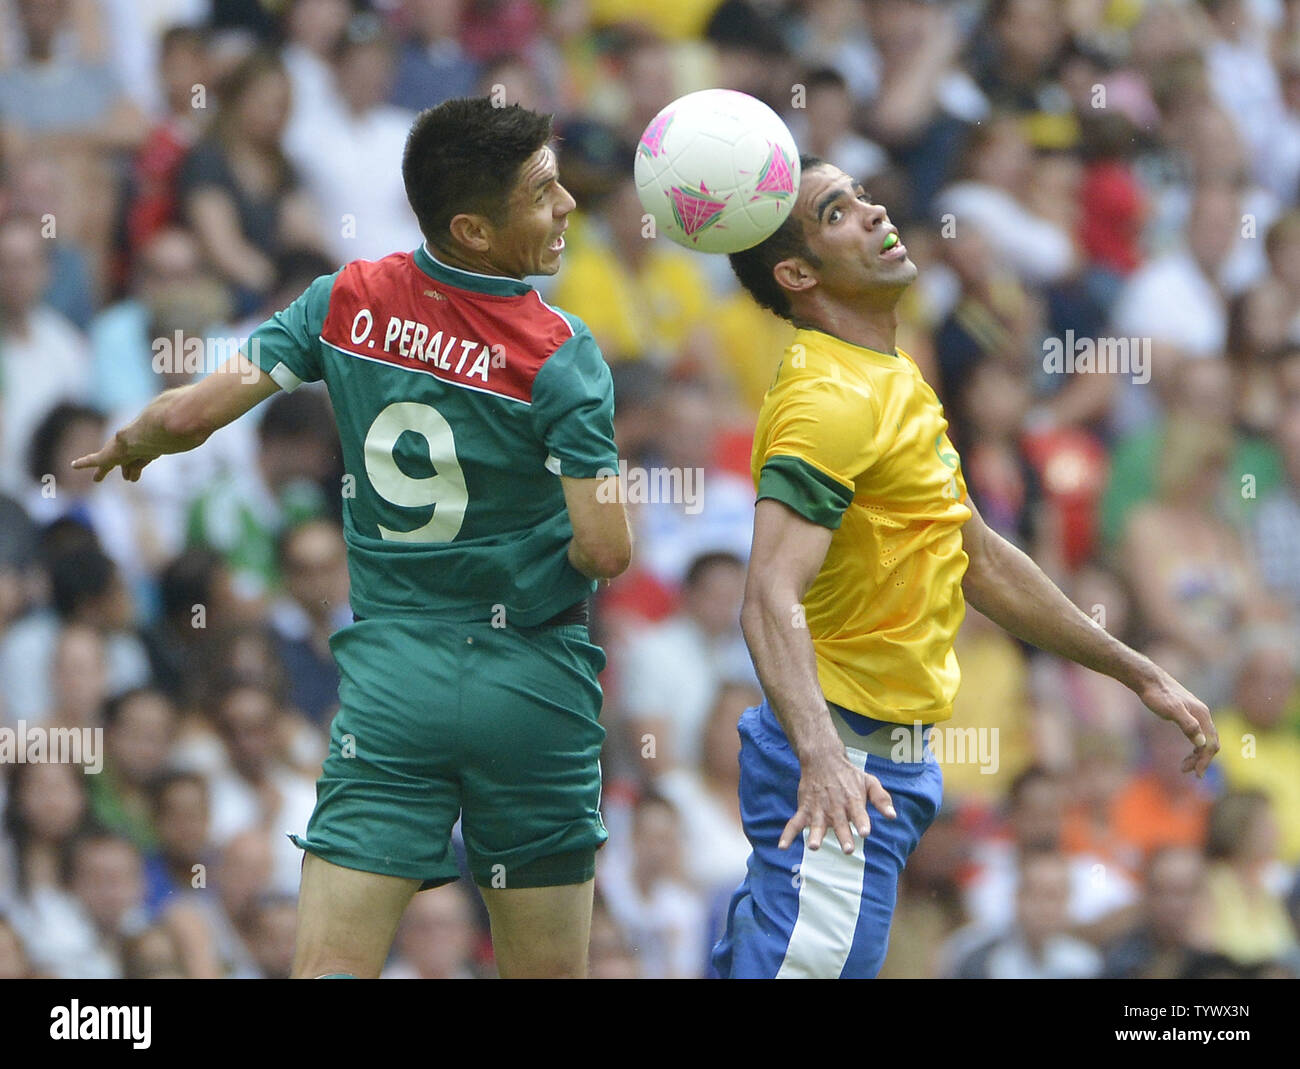 forward Oribe Peralta of Mexico and midfielder Sandro of Brazil go for the ball during the first half of the Gold Medal Football Match at the London 2012 Summer Olympics on August 11, 2012 at Wembley Stadium, London.      UPI/Brian Kersey Stock Photo